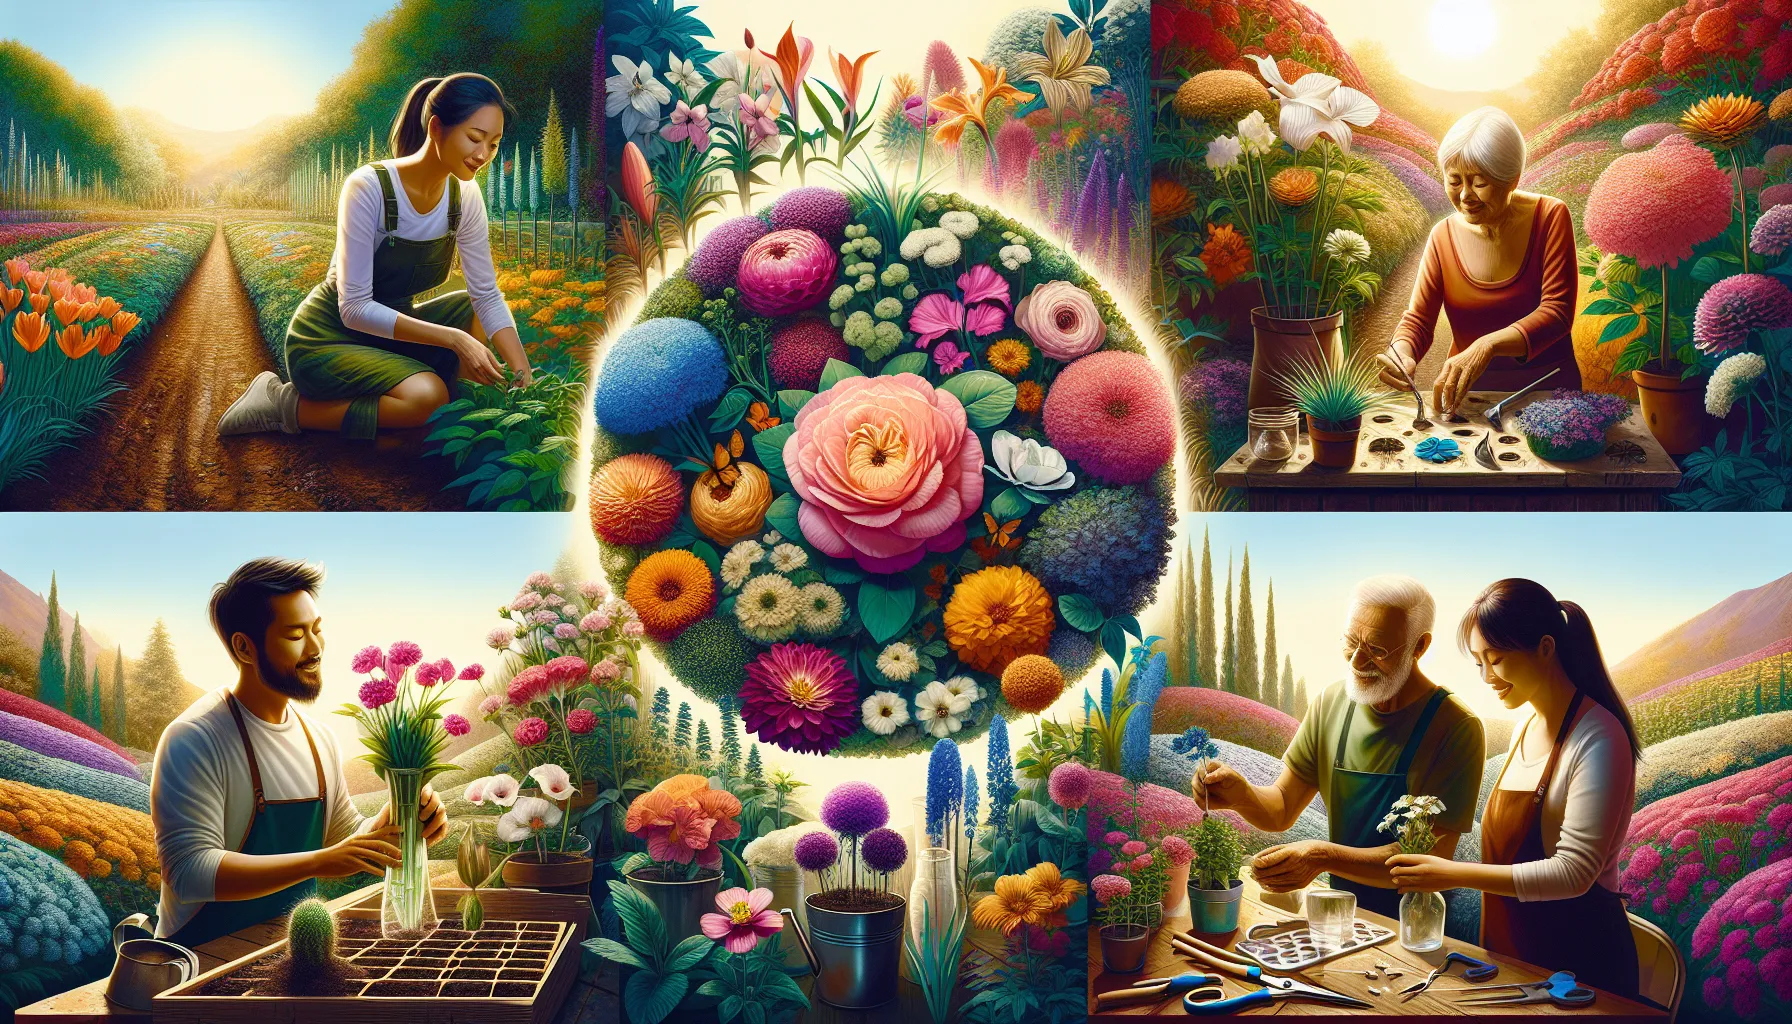 Alt text: A vibrant illustration depicting multiple people engaged in various activities related to growing cut flowers, with a rich tapestry of colorful blooms creating a central heart shape.